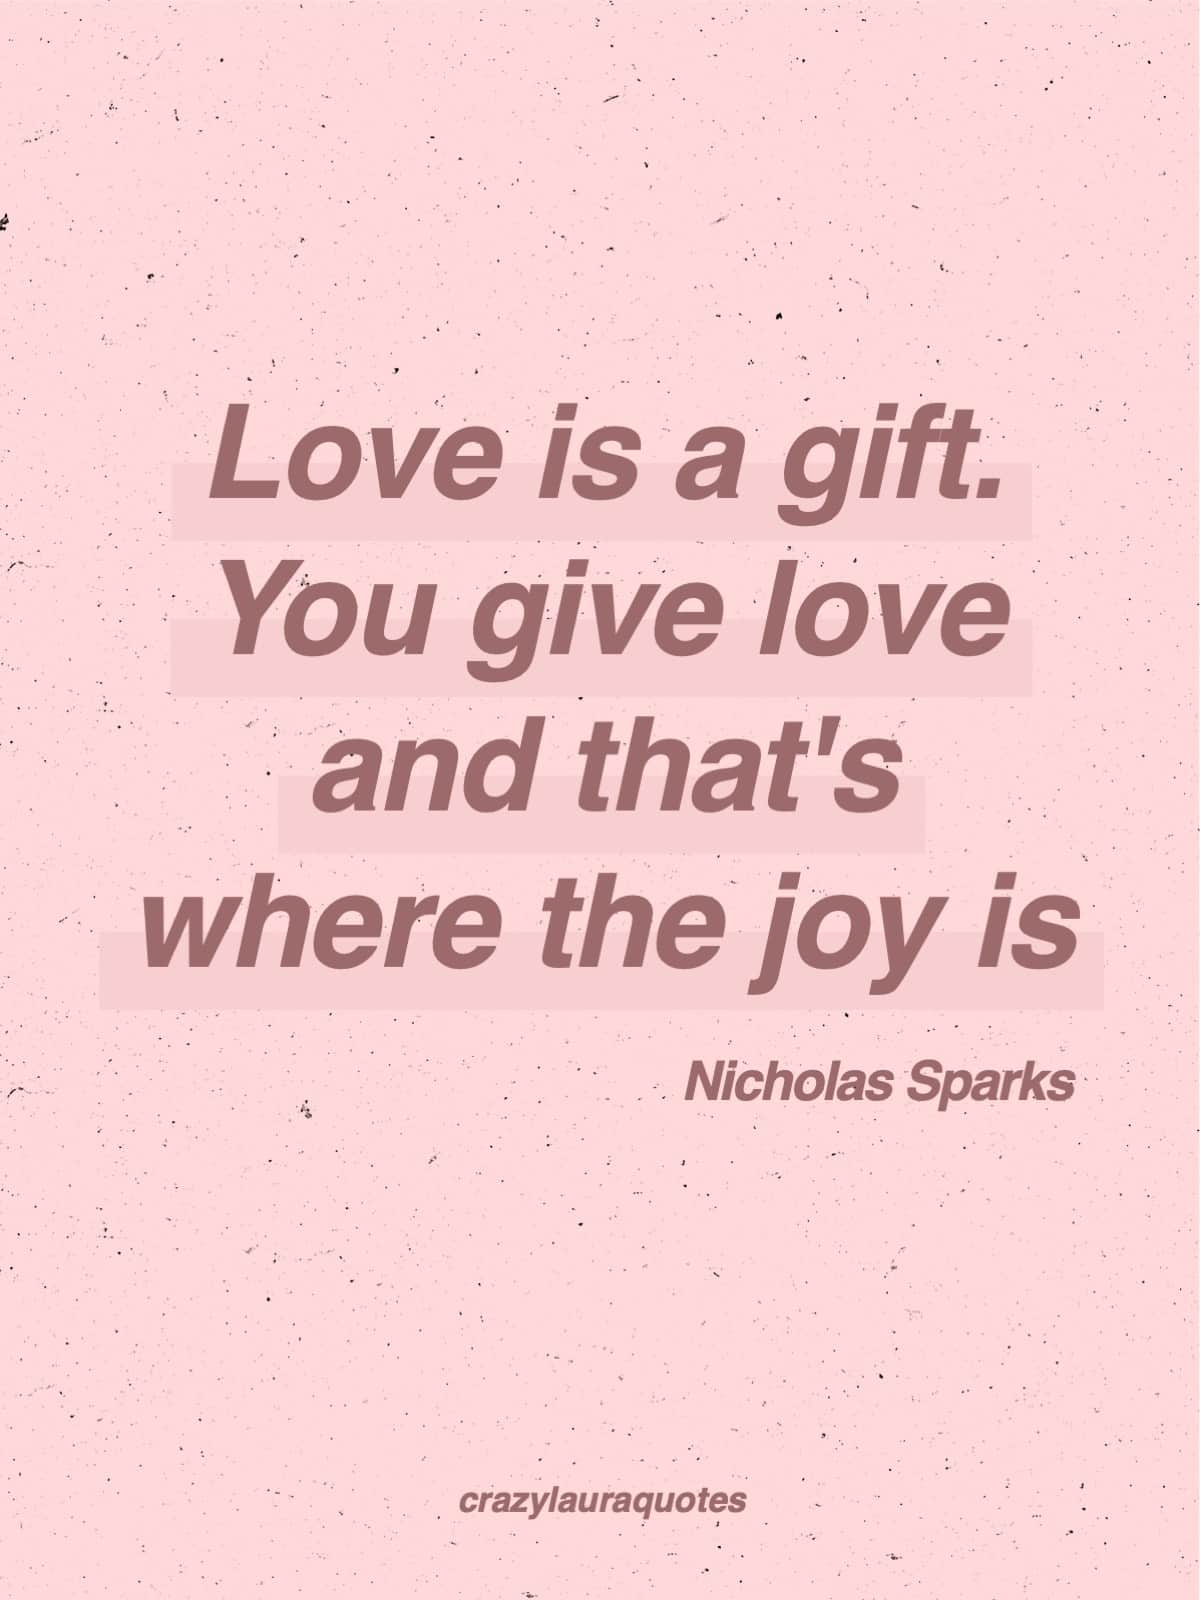 love is a gift nicholas sparks saying